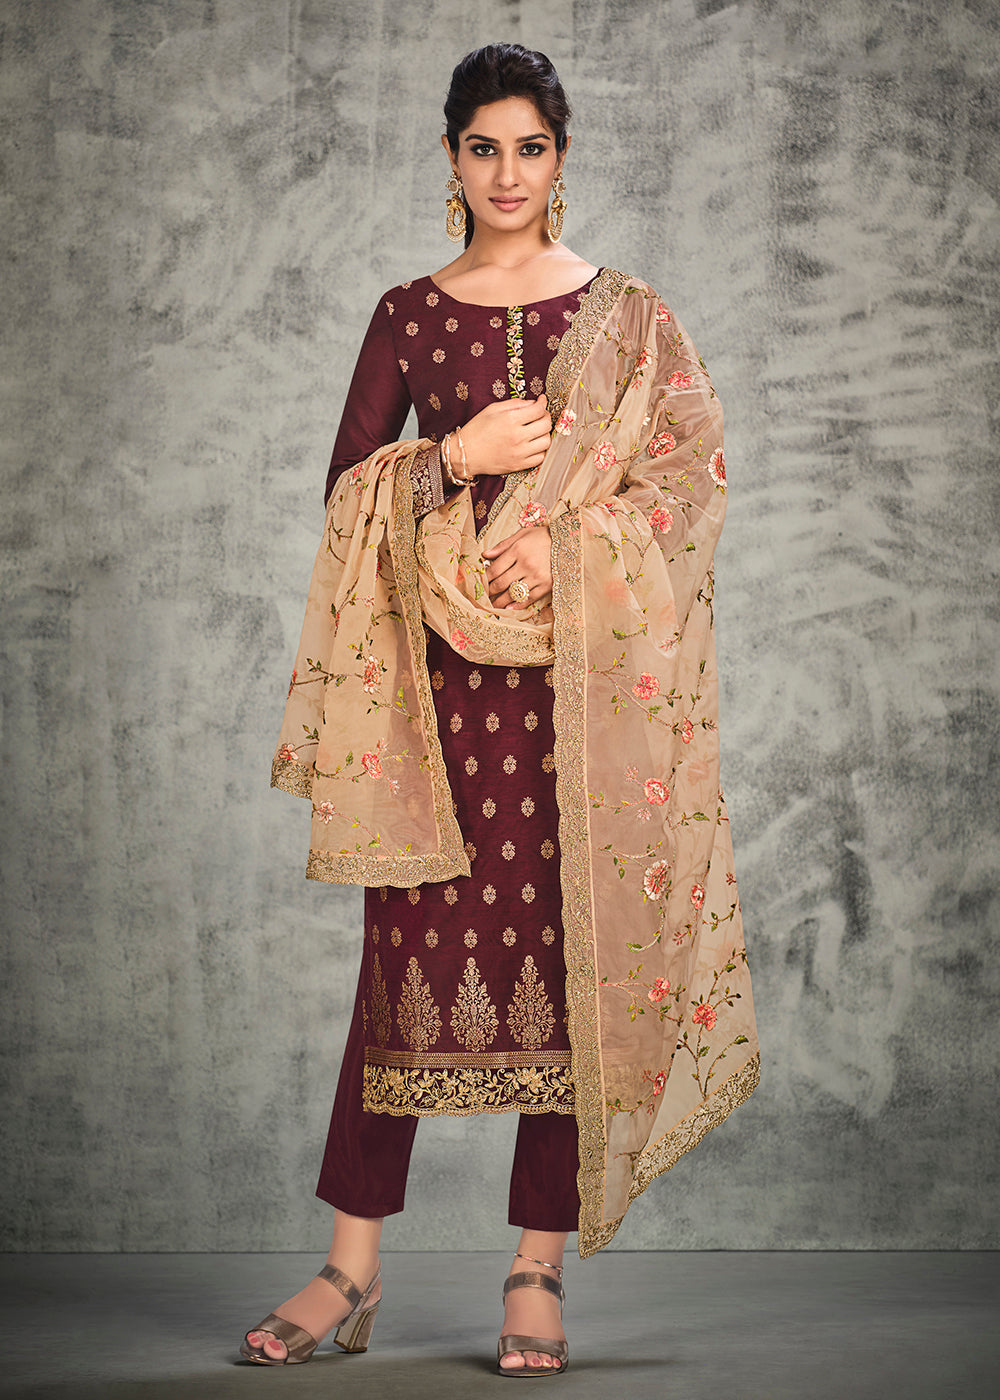 Buy Now Jacquard Silk Adorning Maroon Pakistani Style Suit Online in USA, UK, Canada & Worldwide at Empress Clothing. 